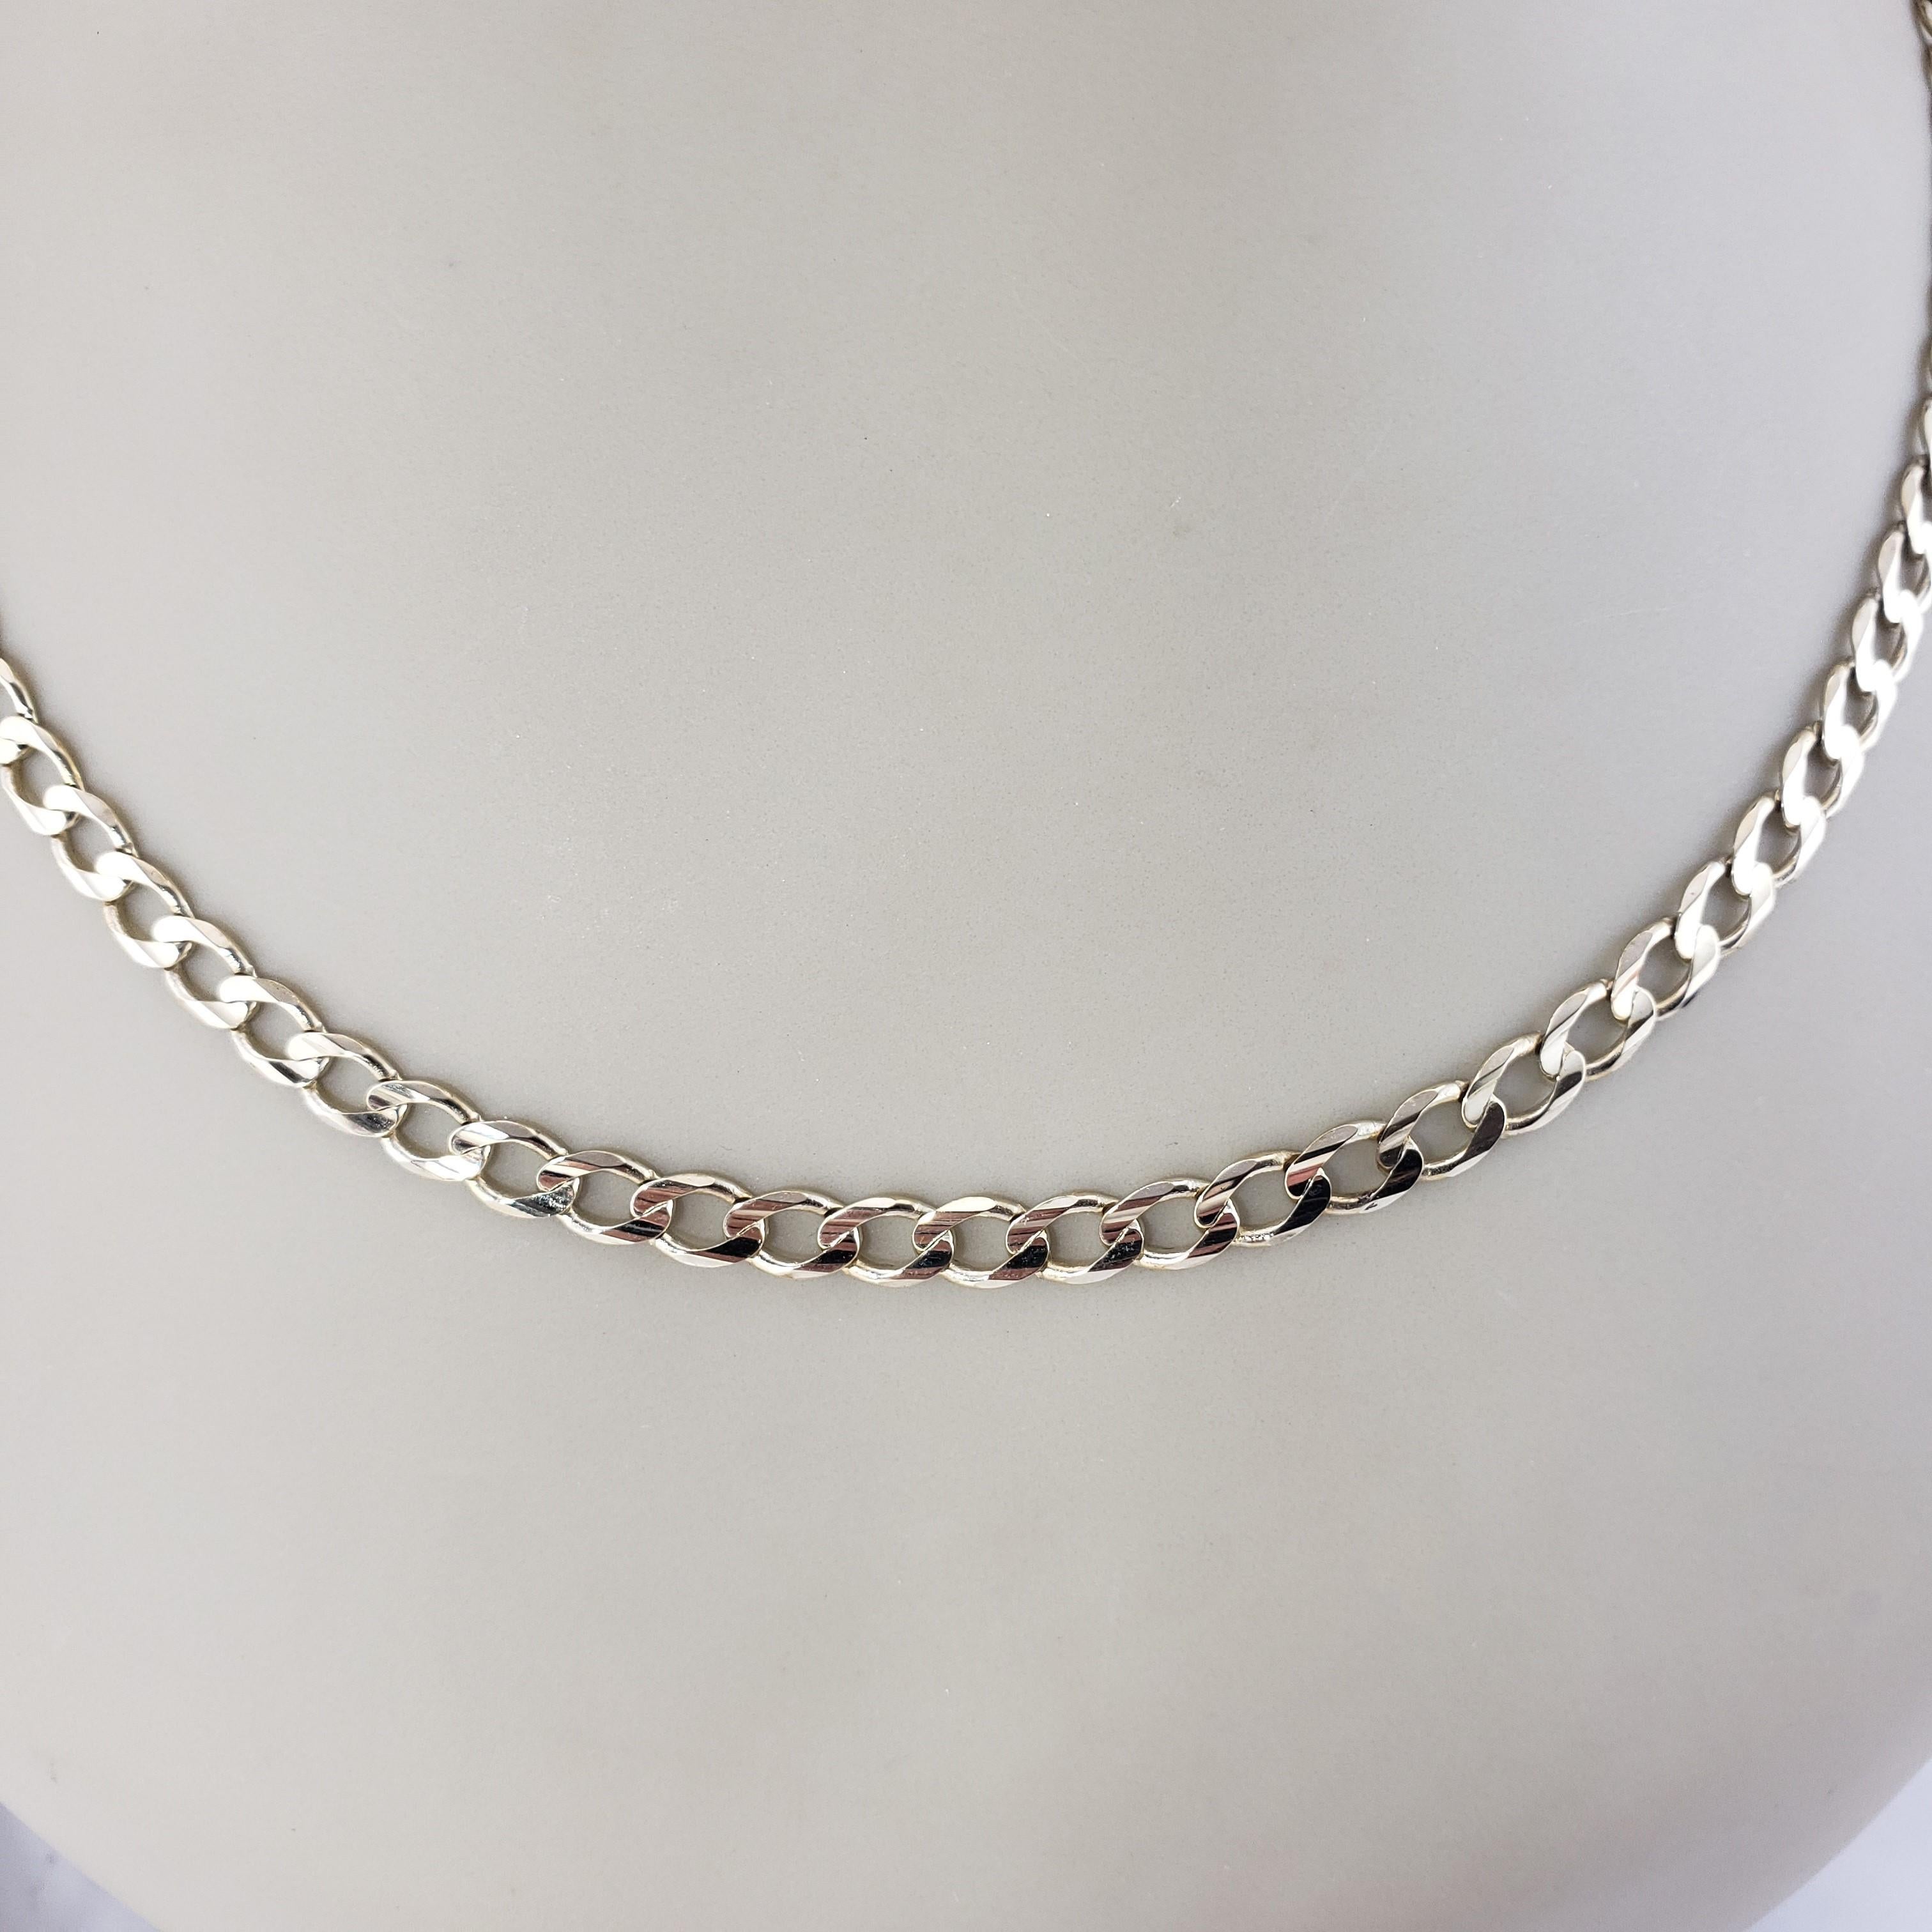 Vintage 10 Karat Yellow Gold Curb Chain Necklace #15329 For Sale 4